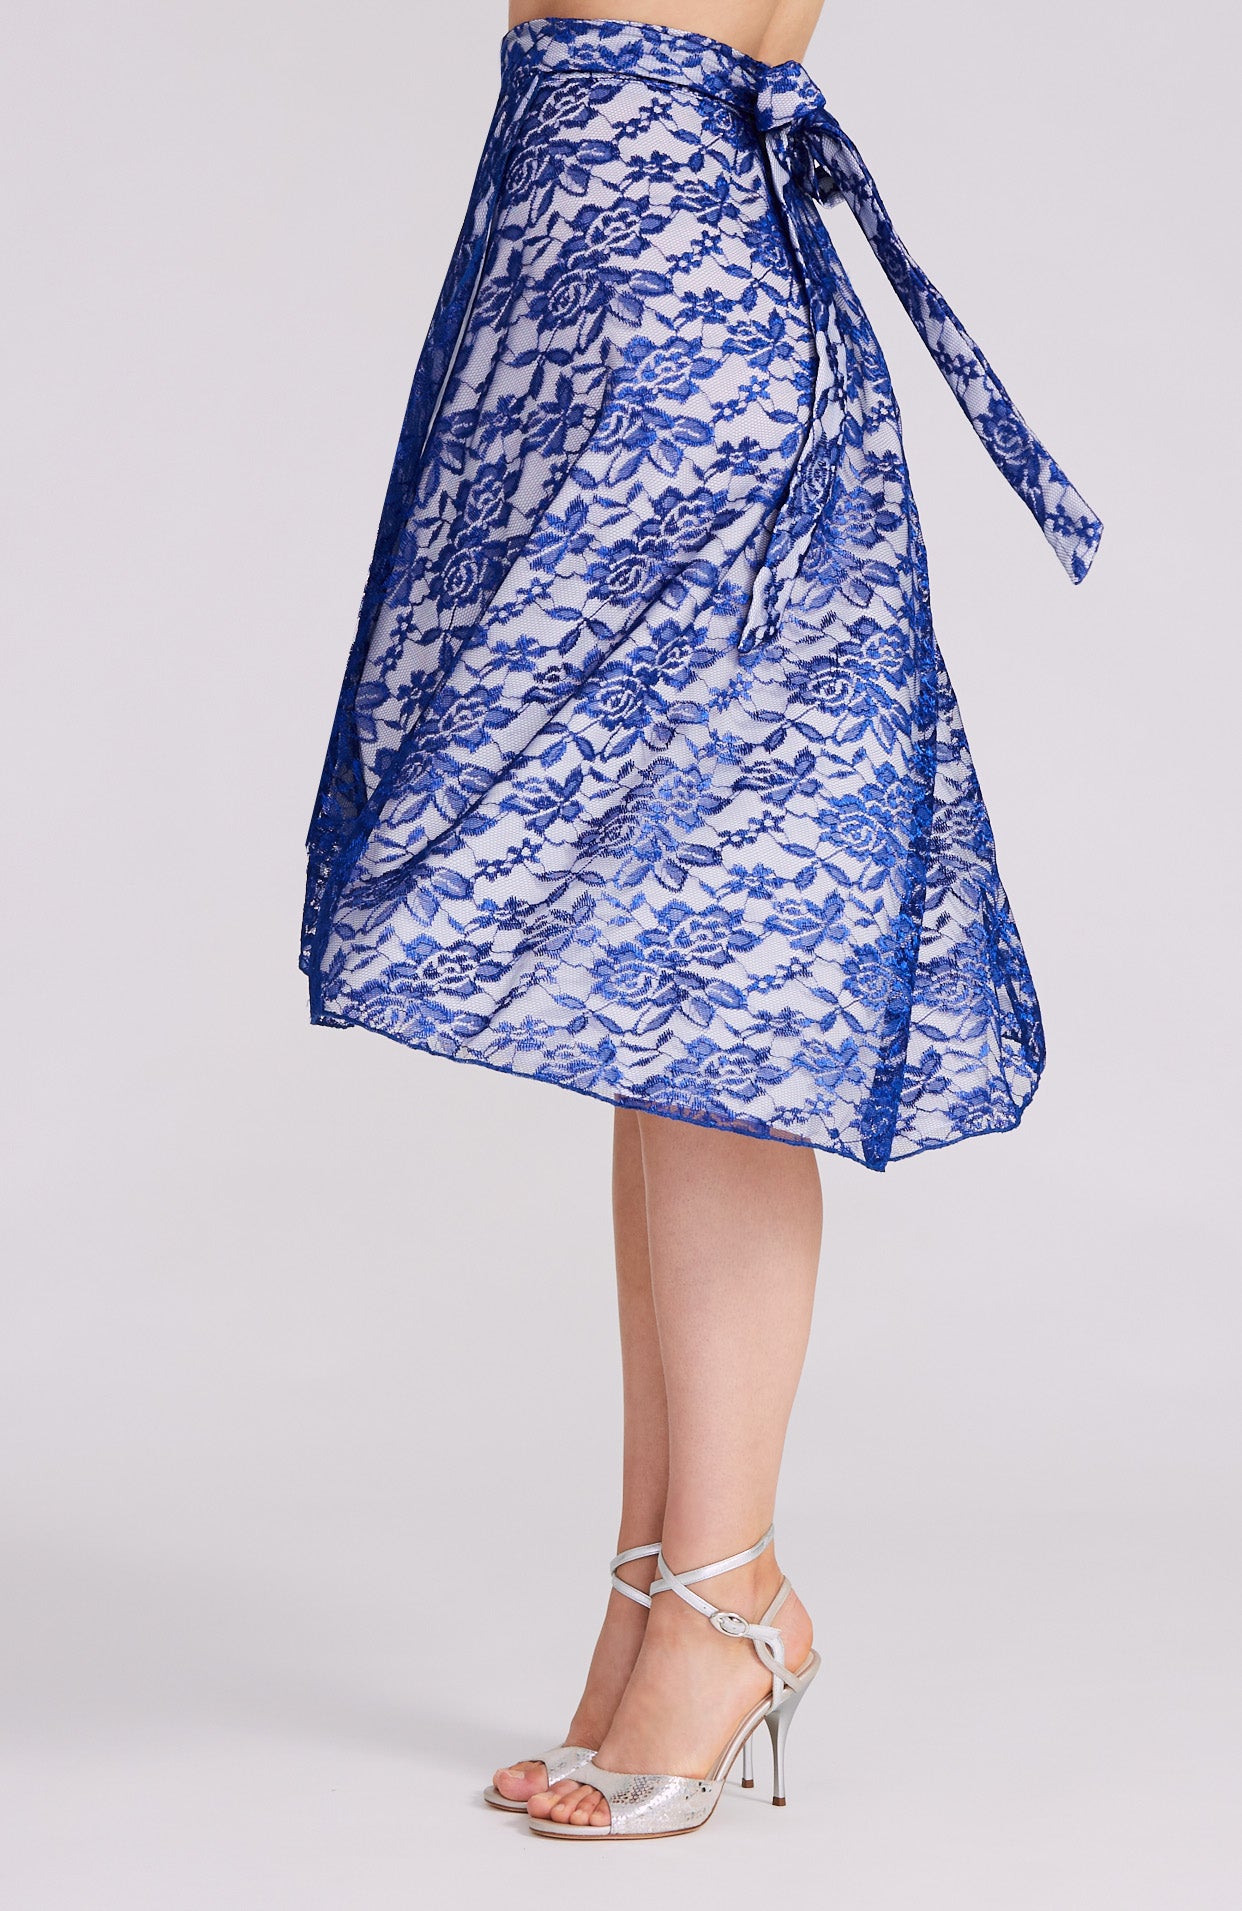 COCO - Wrap Skirt in Royal Blue Lace